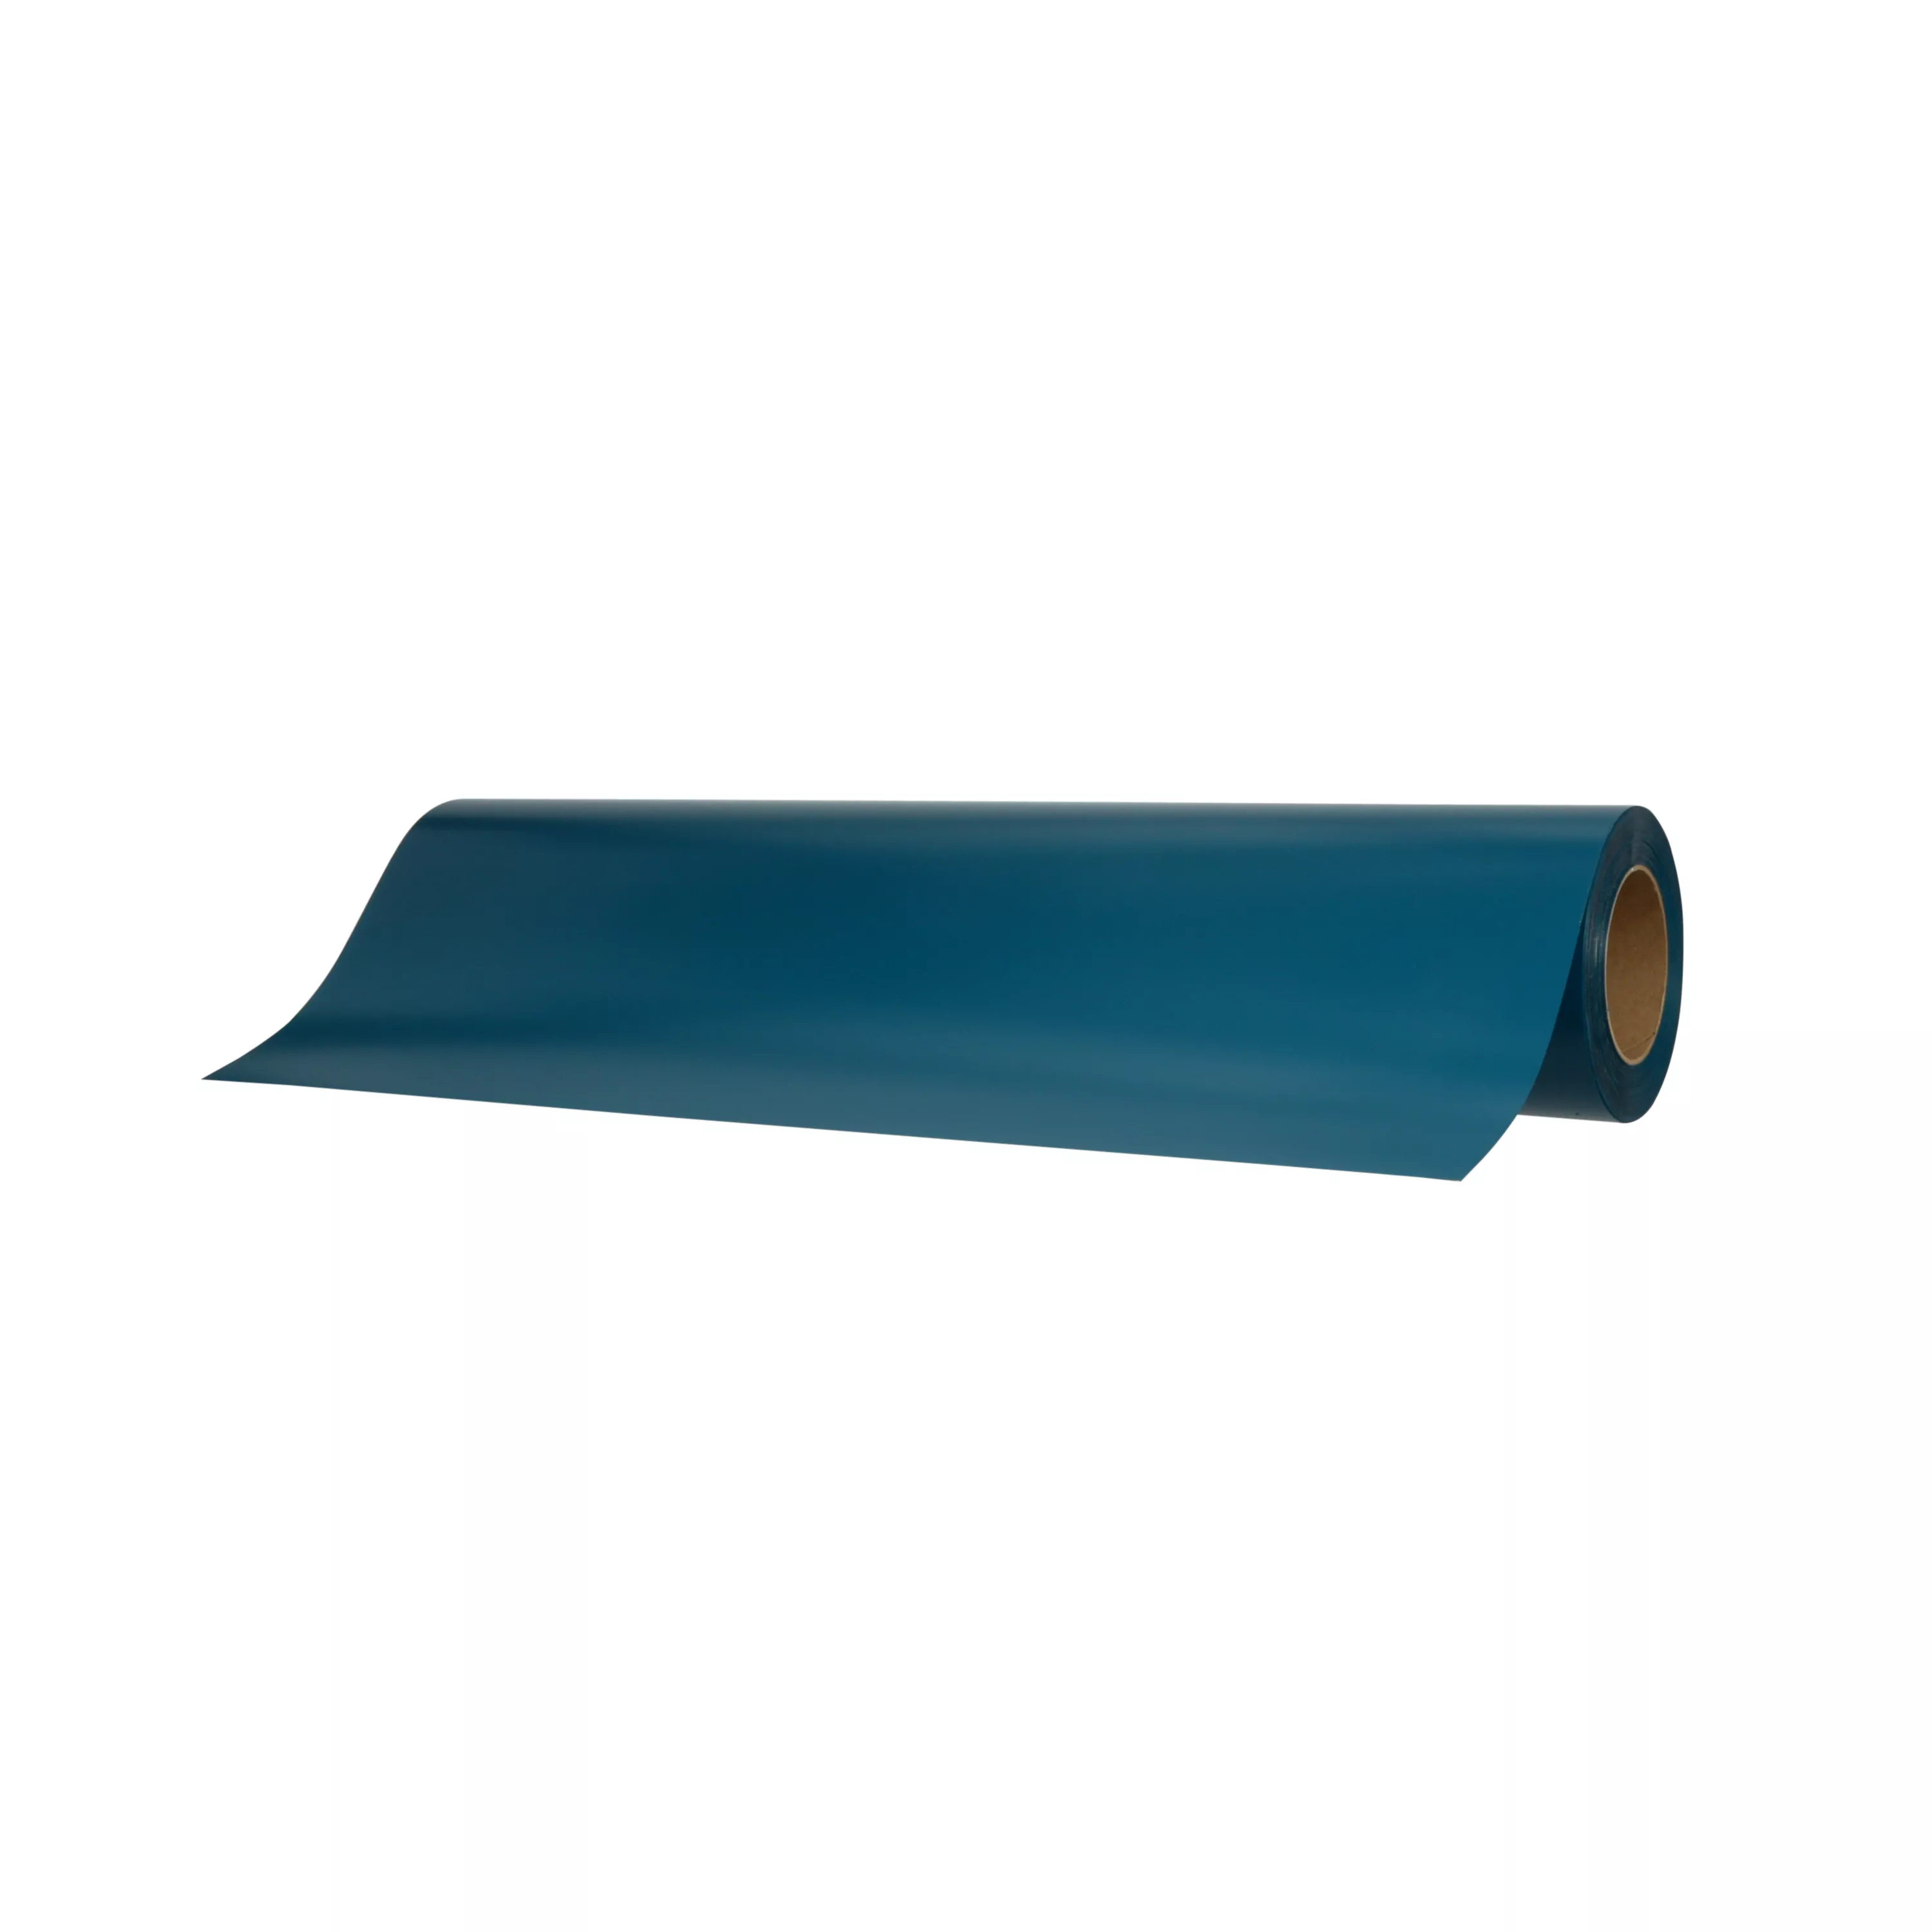 3M™ Scotchcal™ Translucent Graphic Film 3630-56, Glacial Green, 48 in x
50 yd, 1 Roll/Case